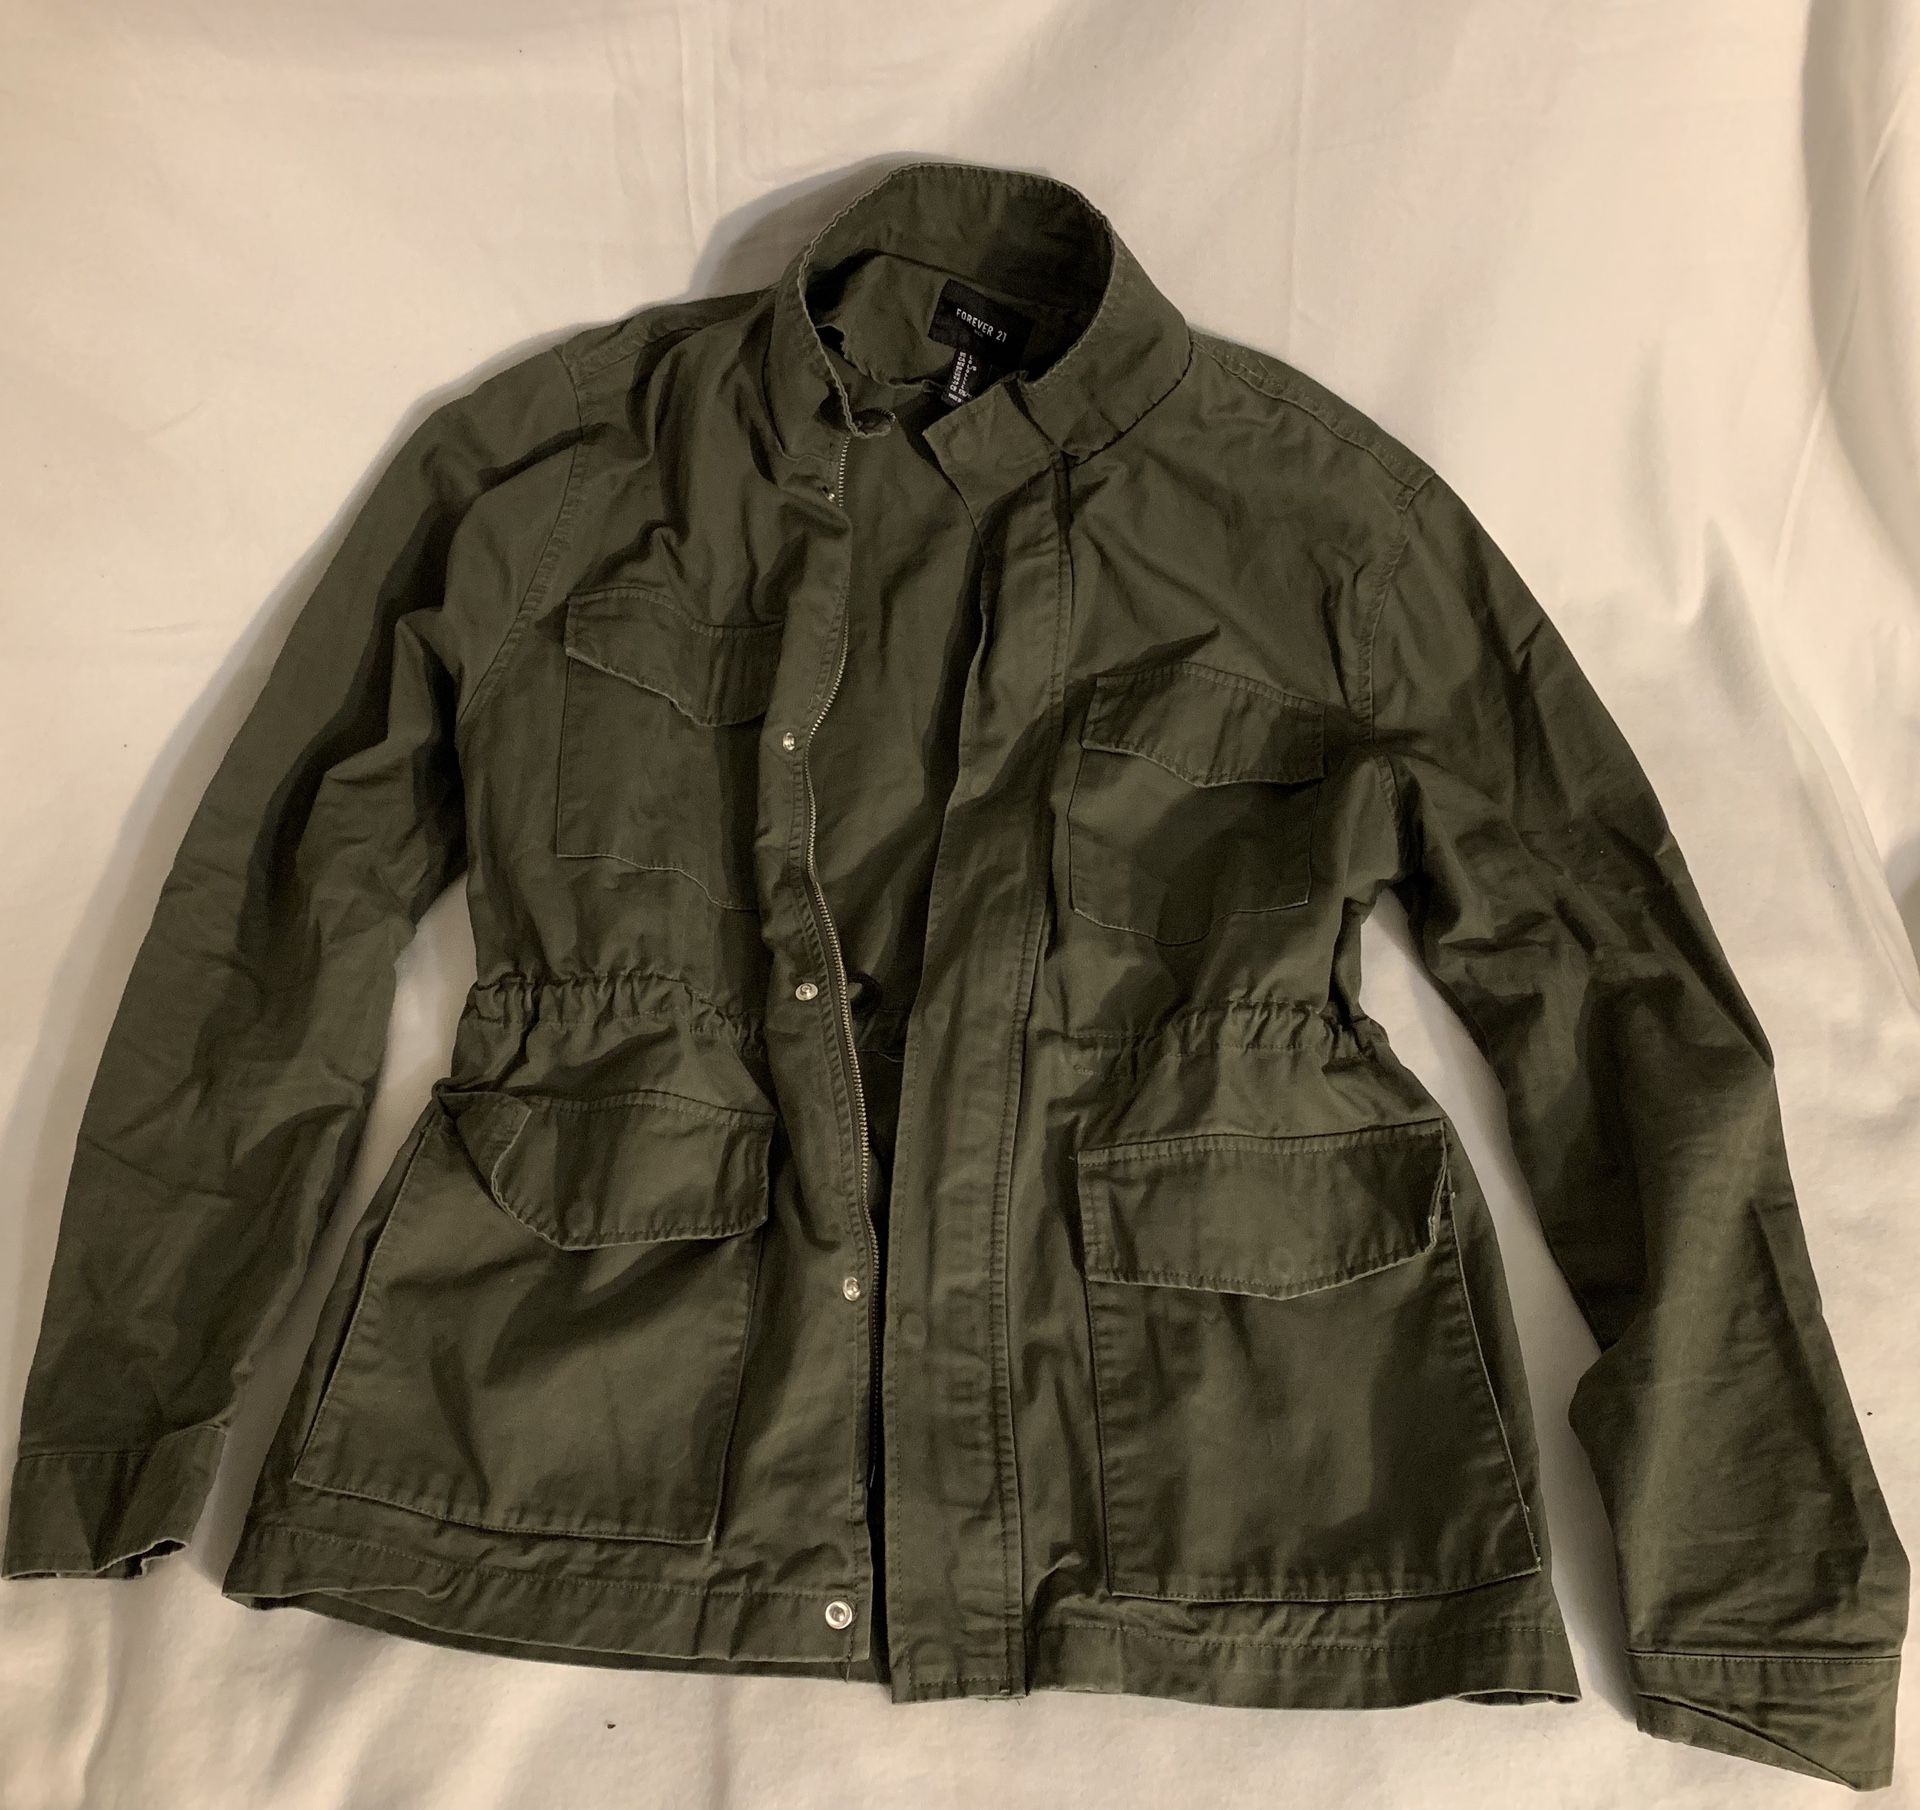 Army green jacket size Large Forever 21